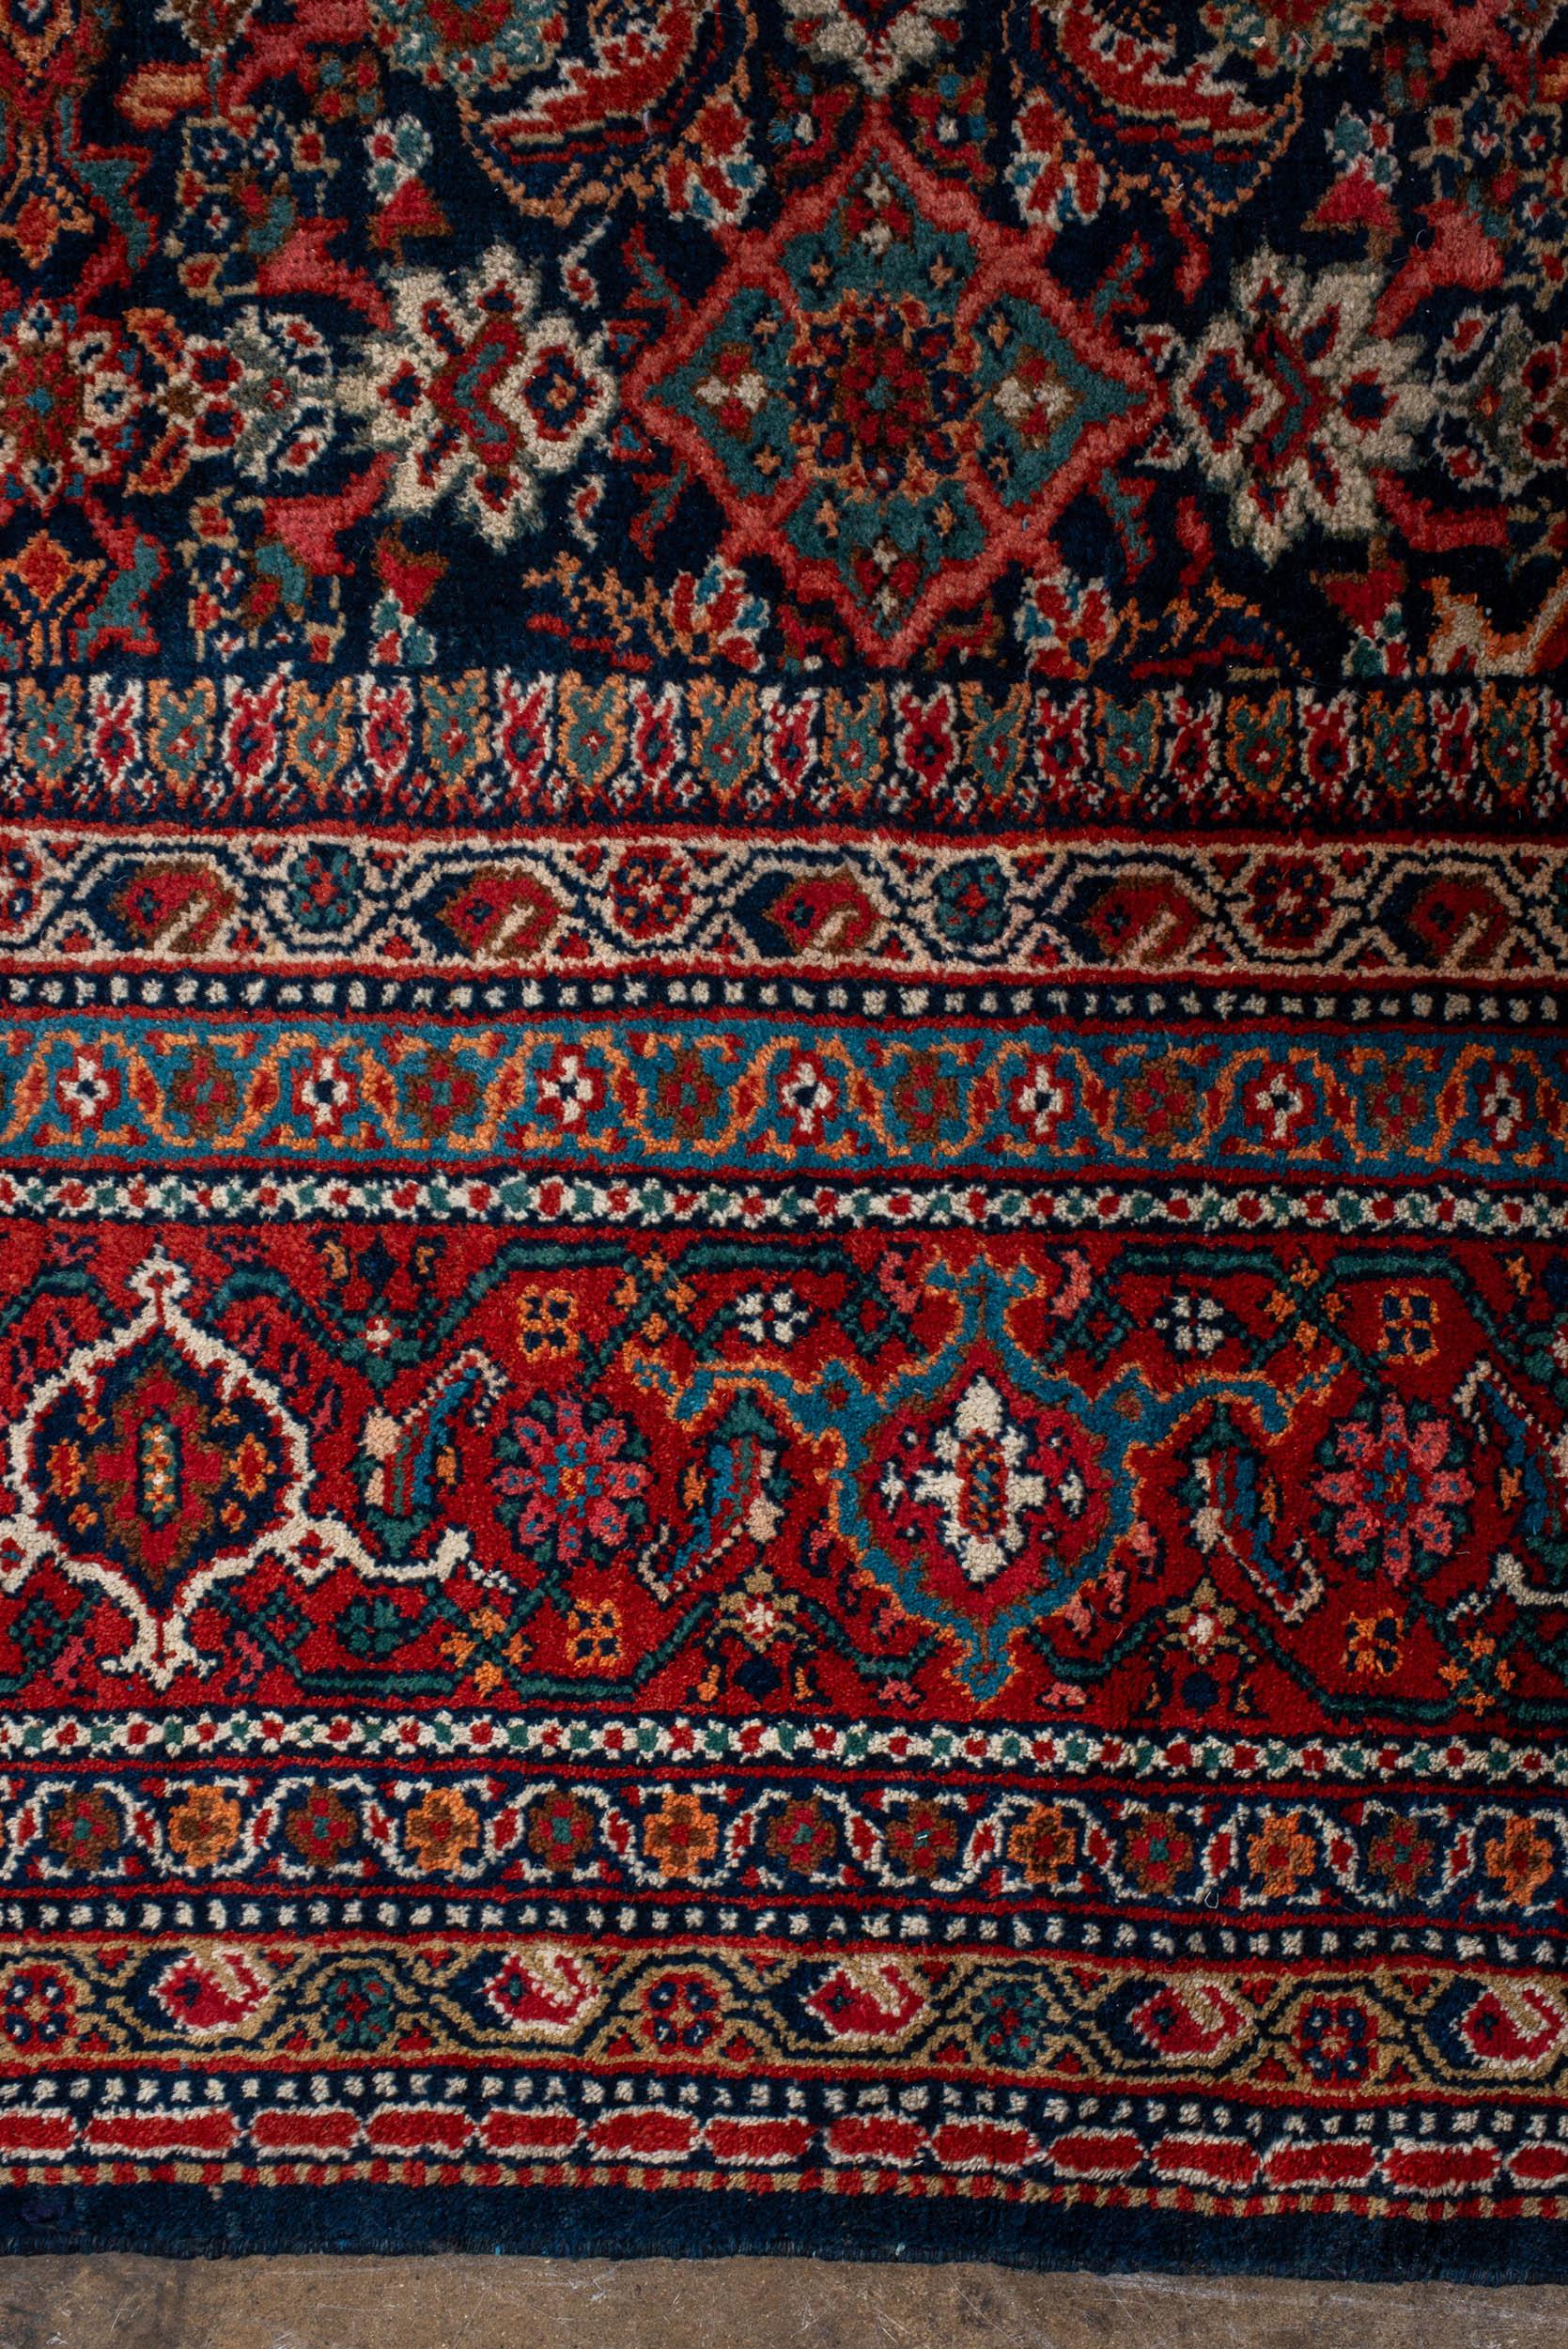 The Antique Persian Mahal rug is a traditional handwoven luxury rug with a multi-color design. Its size measures approximately 12 feet in width and 13 feet 10 inches in length. The term 